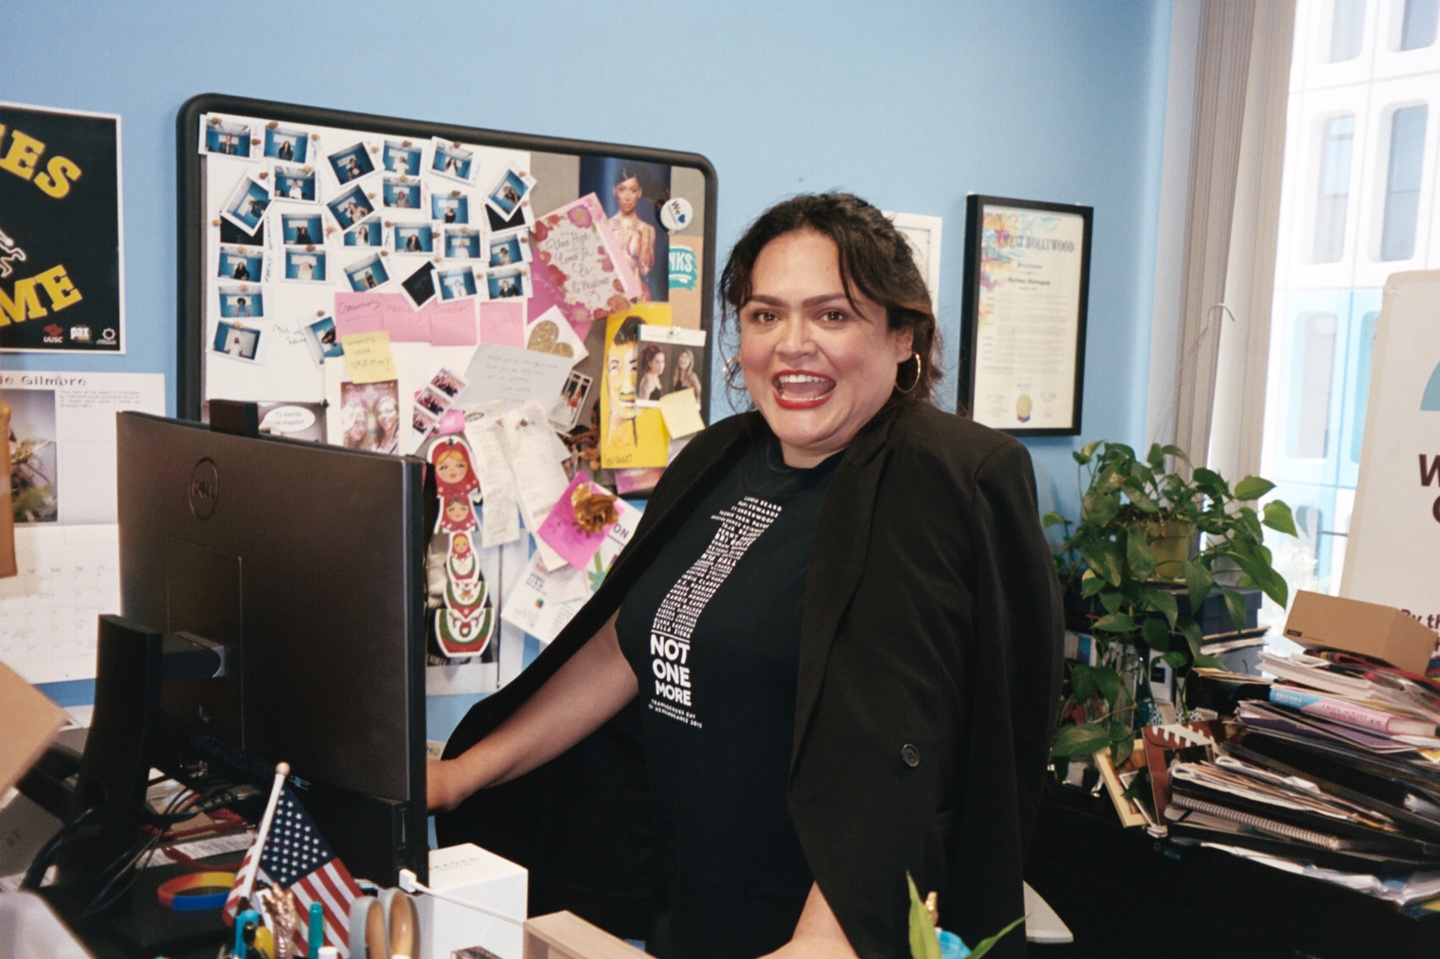 Mariana Marroquin, program manager of the Transgender Wellness Center (TWC) standing at her desk.